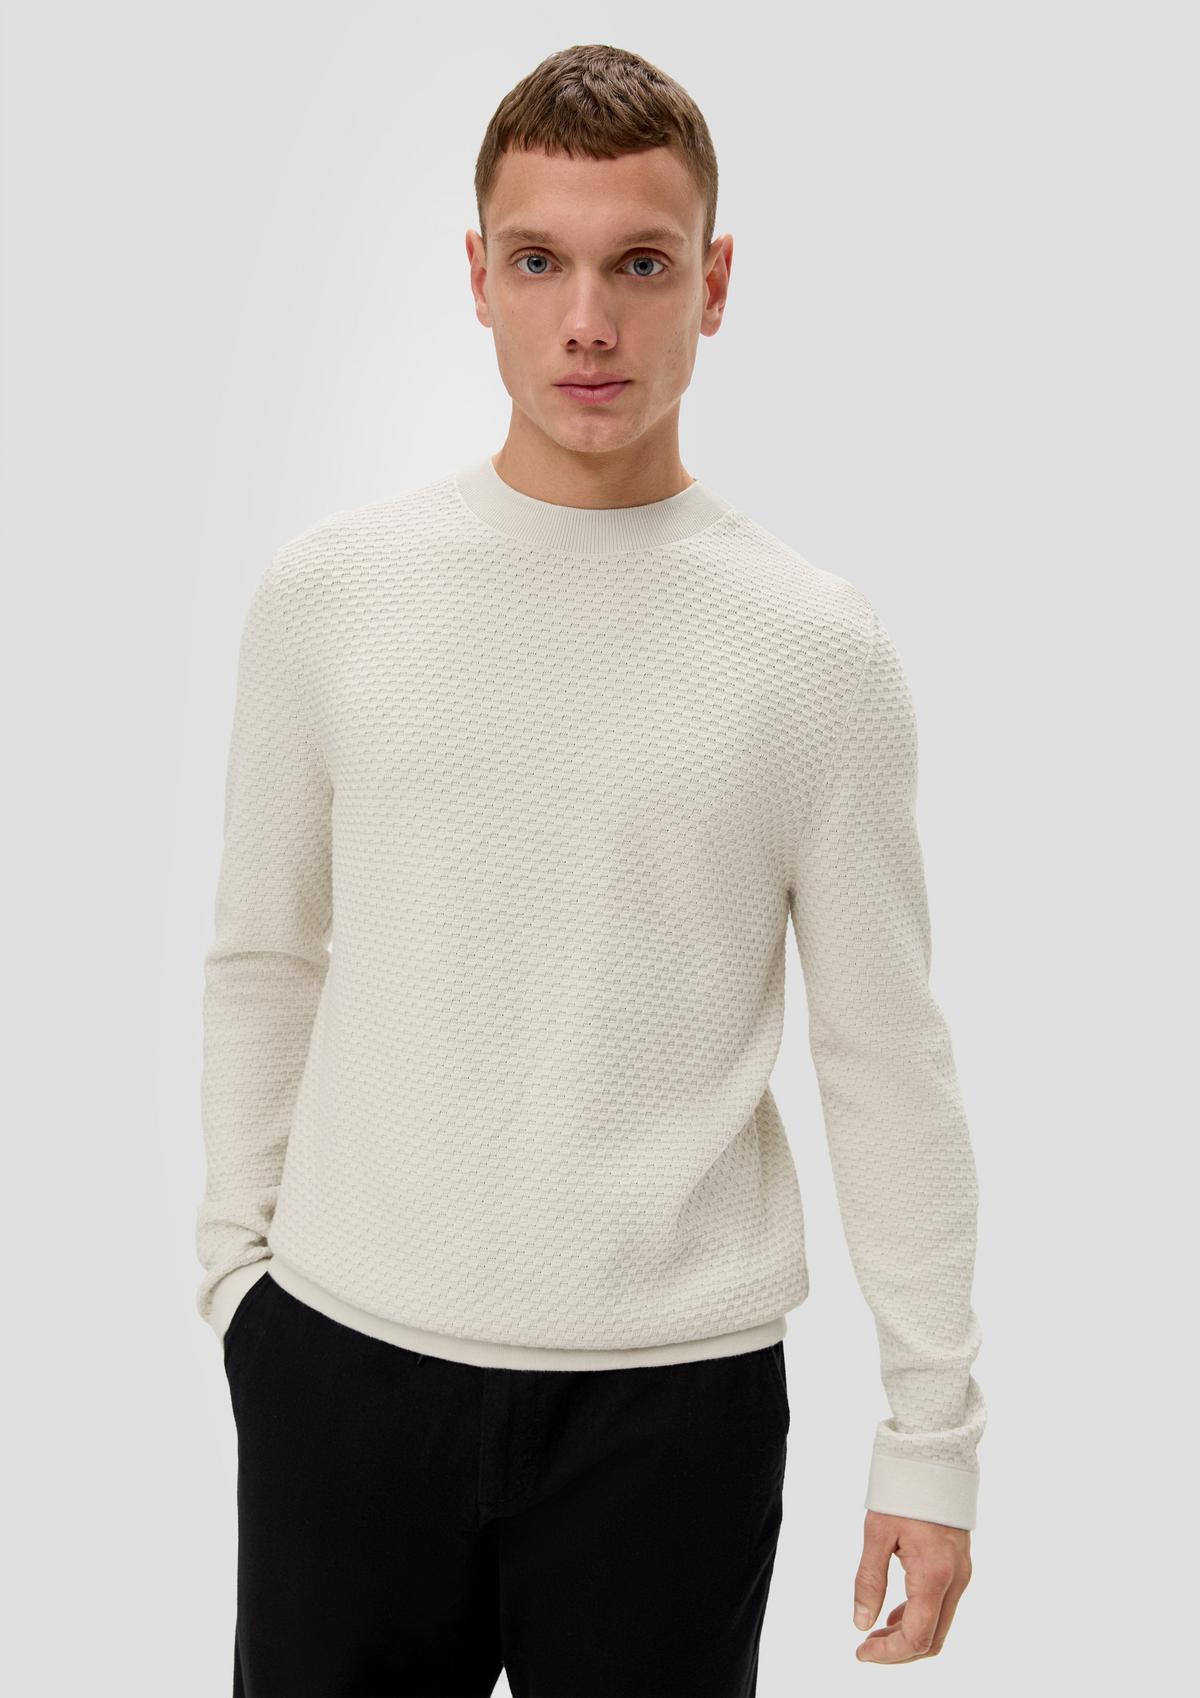 Knitted jumper with a garment wash